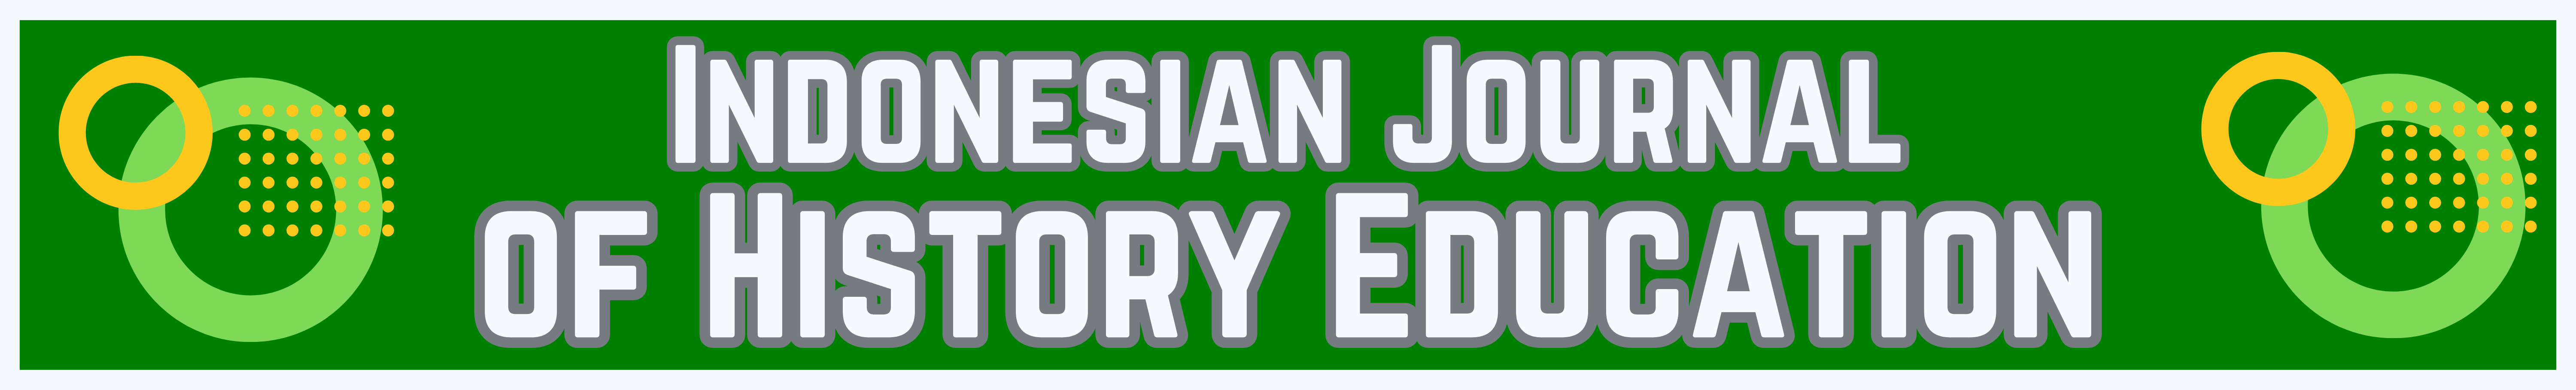 INDONESIAN JOURNAL OF HISTORY EDUCATION